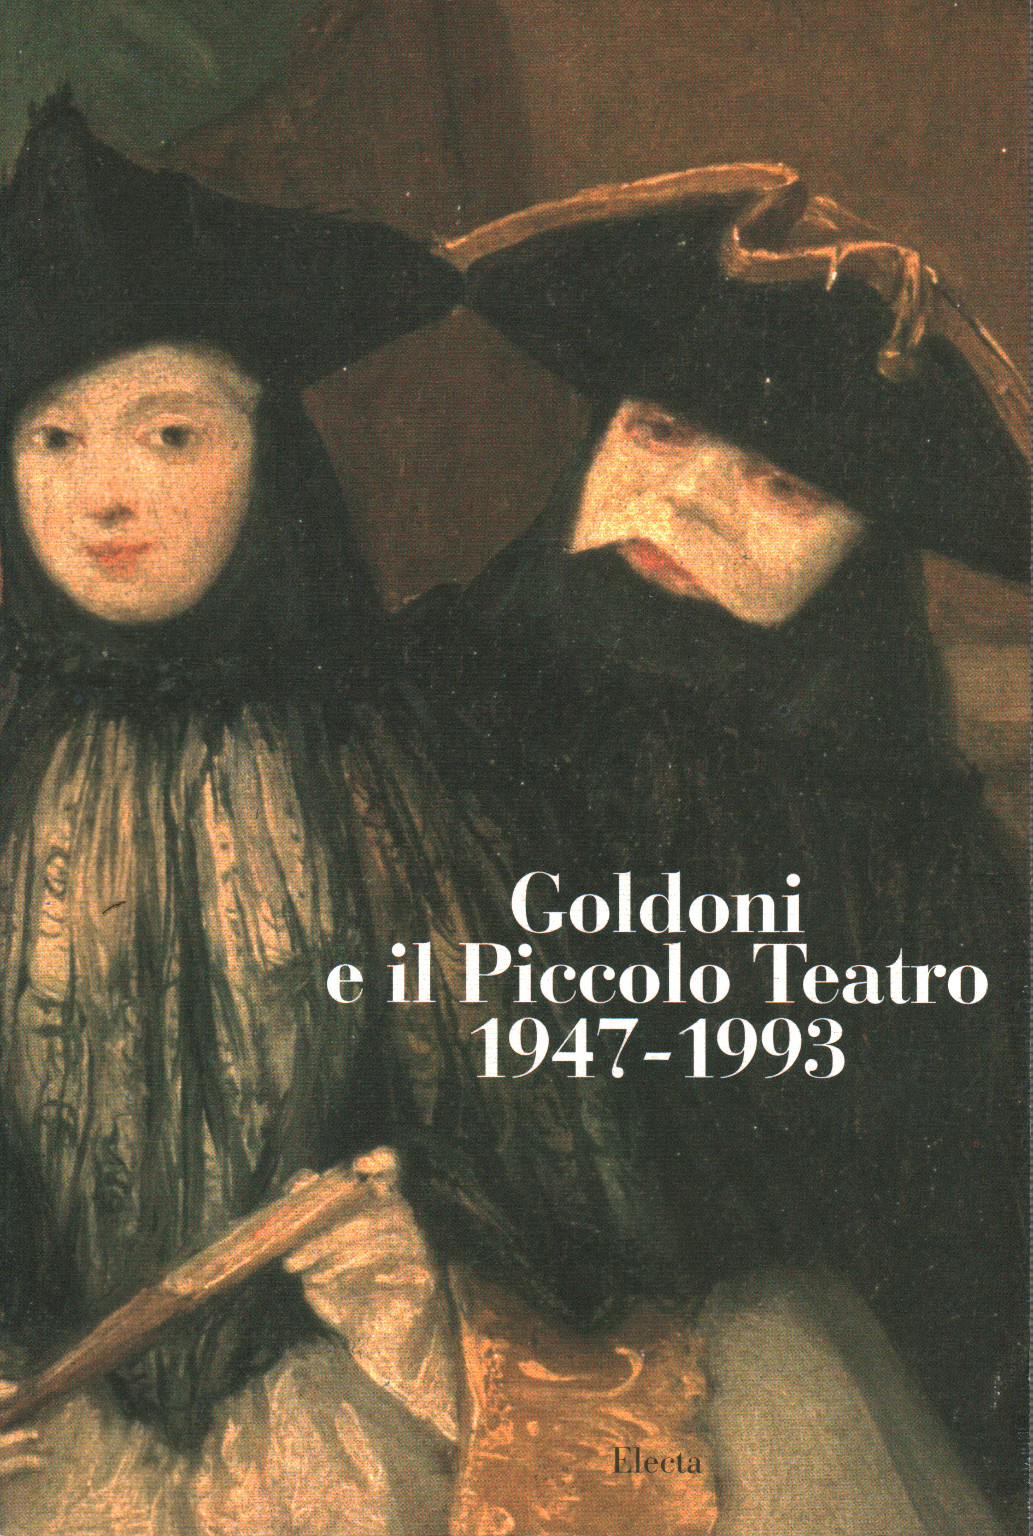 Goldoni and the Small Theatre 1947-1993, s.a.